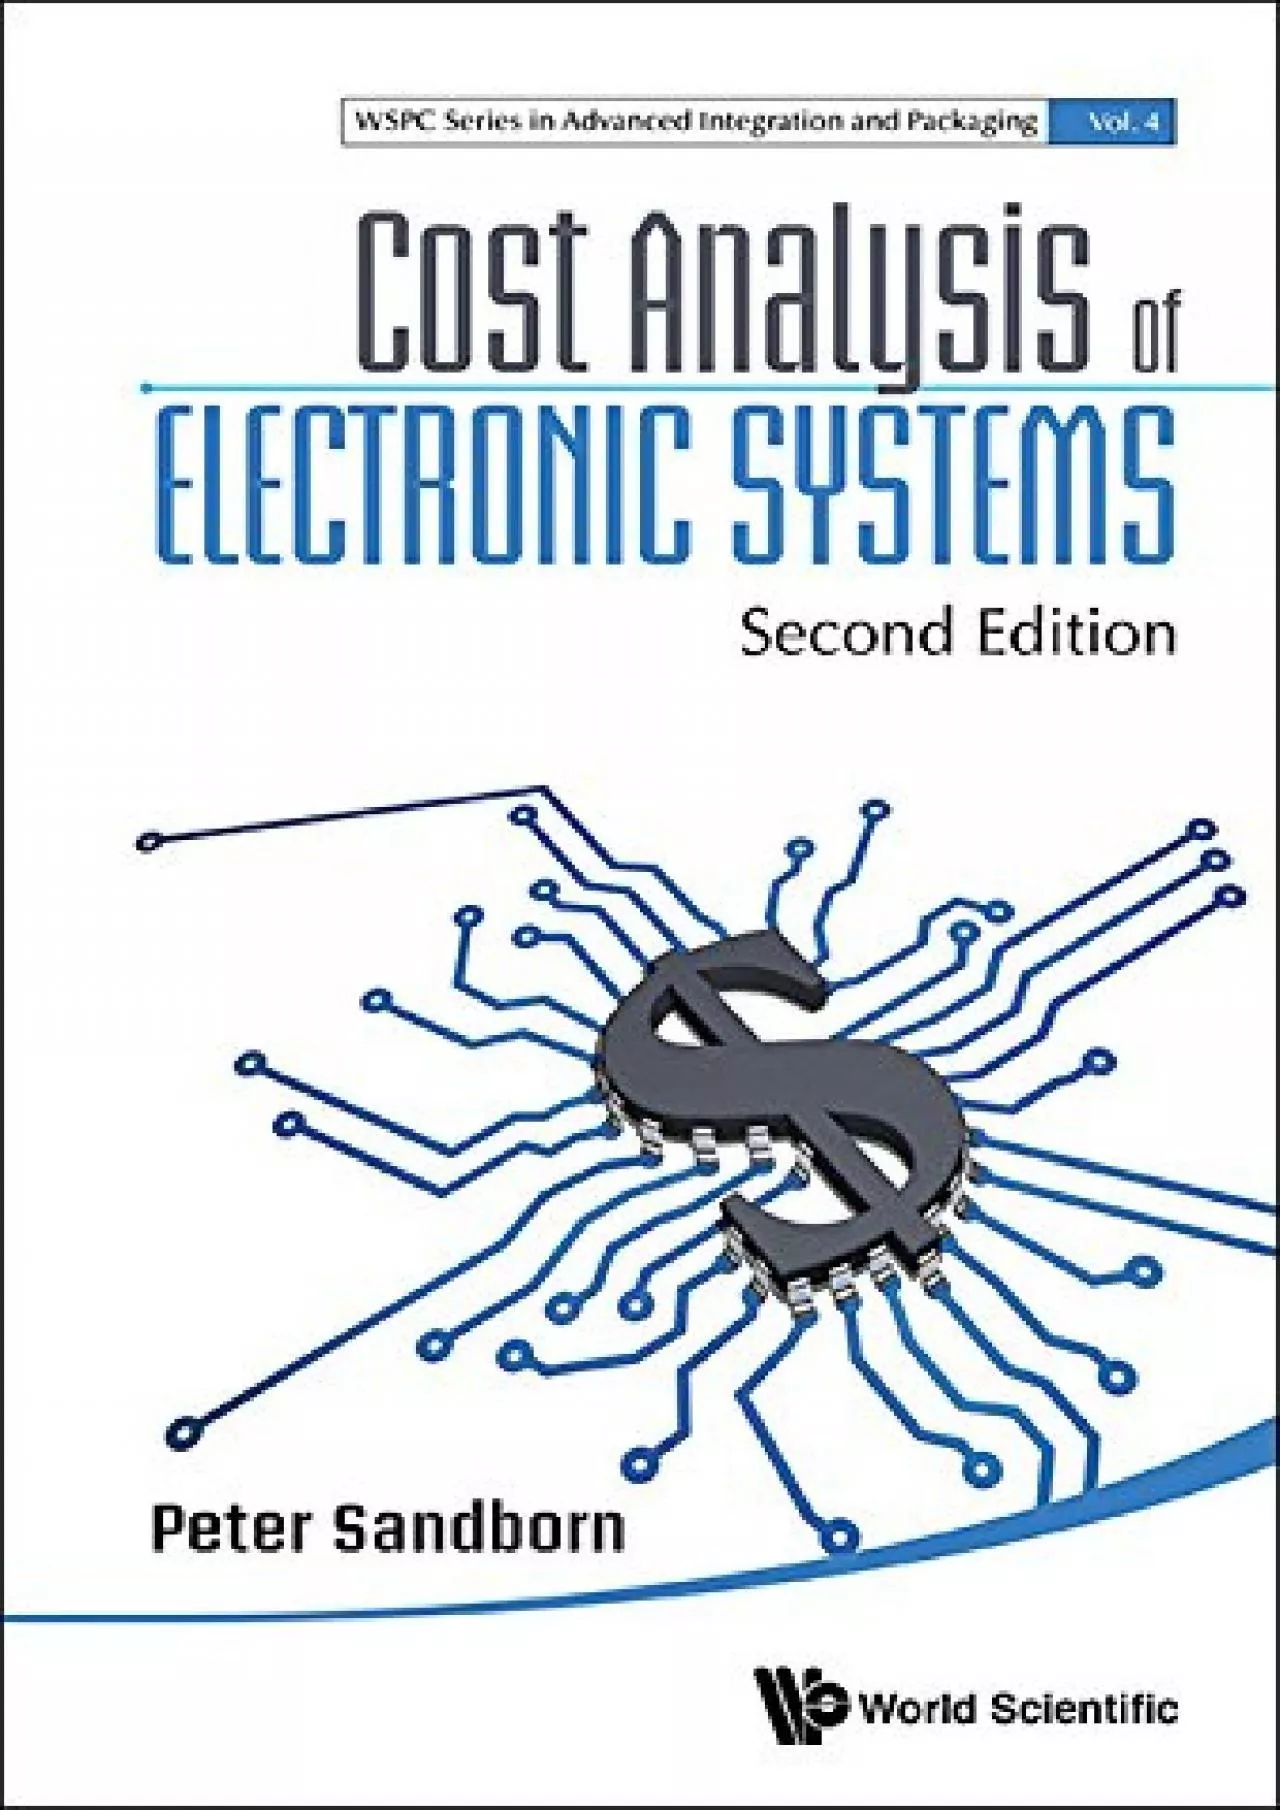 Cost Analysis Of Electronic Systems (Second Edition) (Wspc Series In Advanced Integration